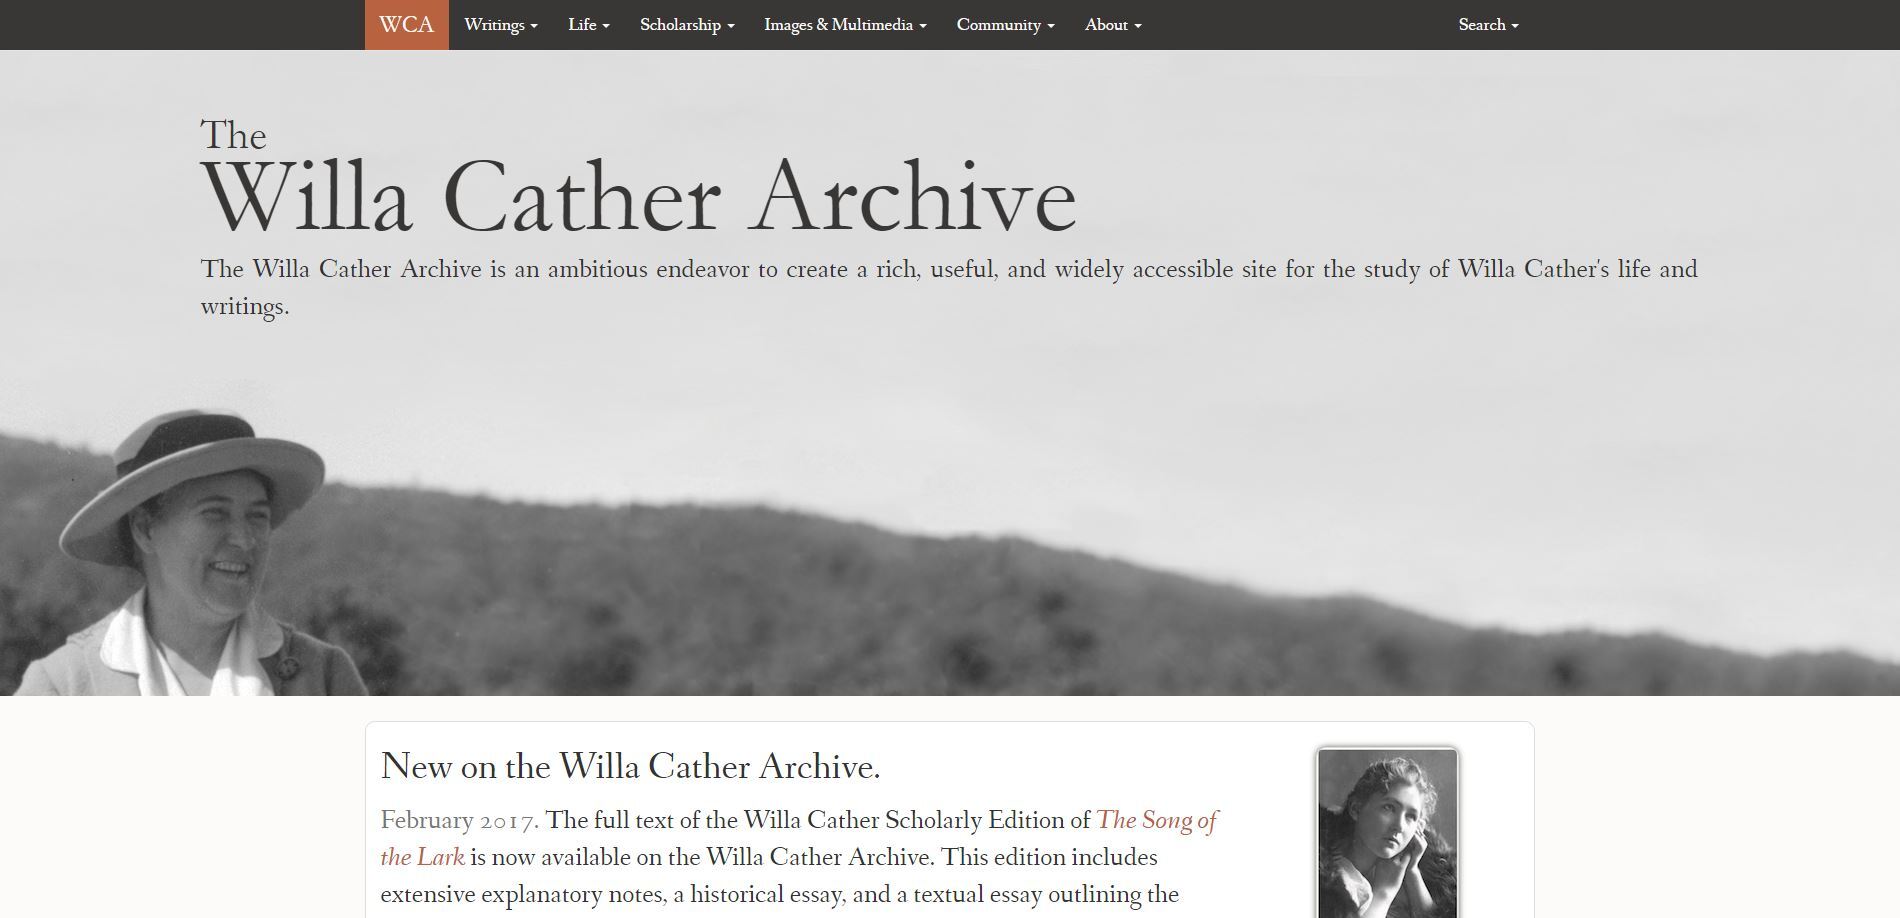 The Willa Cather Archive, funded by the NEH, makes her novels, letters, and other writings available online.  Image courtesy of the Center for Digital Research in the Humanities at the University of Nebraska, Lincoln.